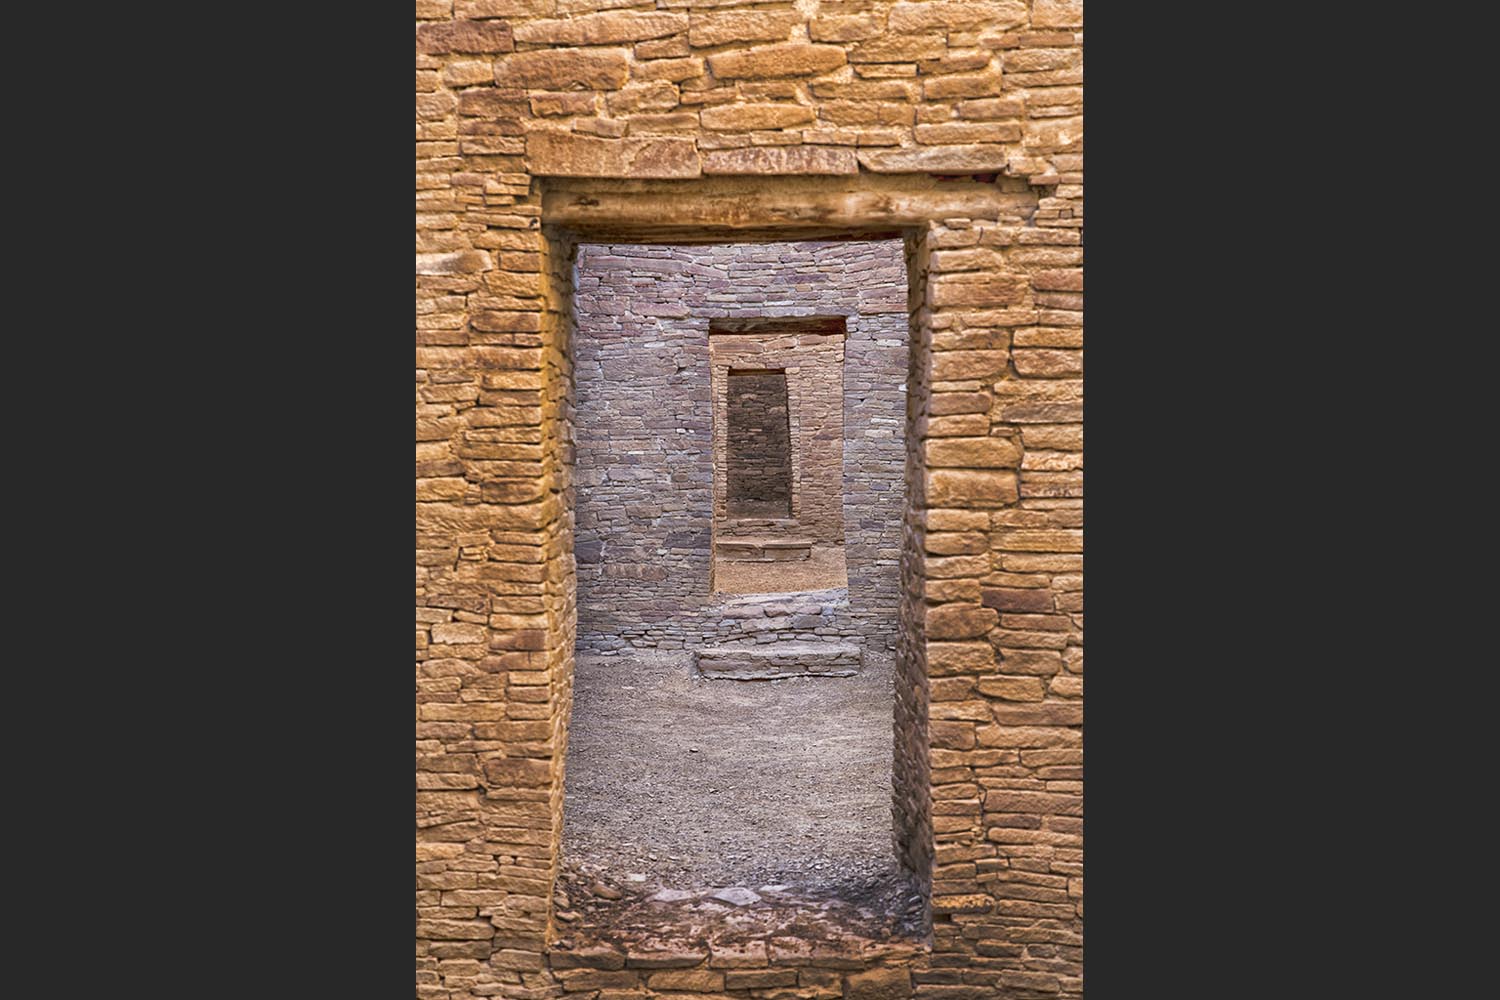 Jeff Driver: Doorways to the Past - Chaco Canyon, New Mexico